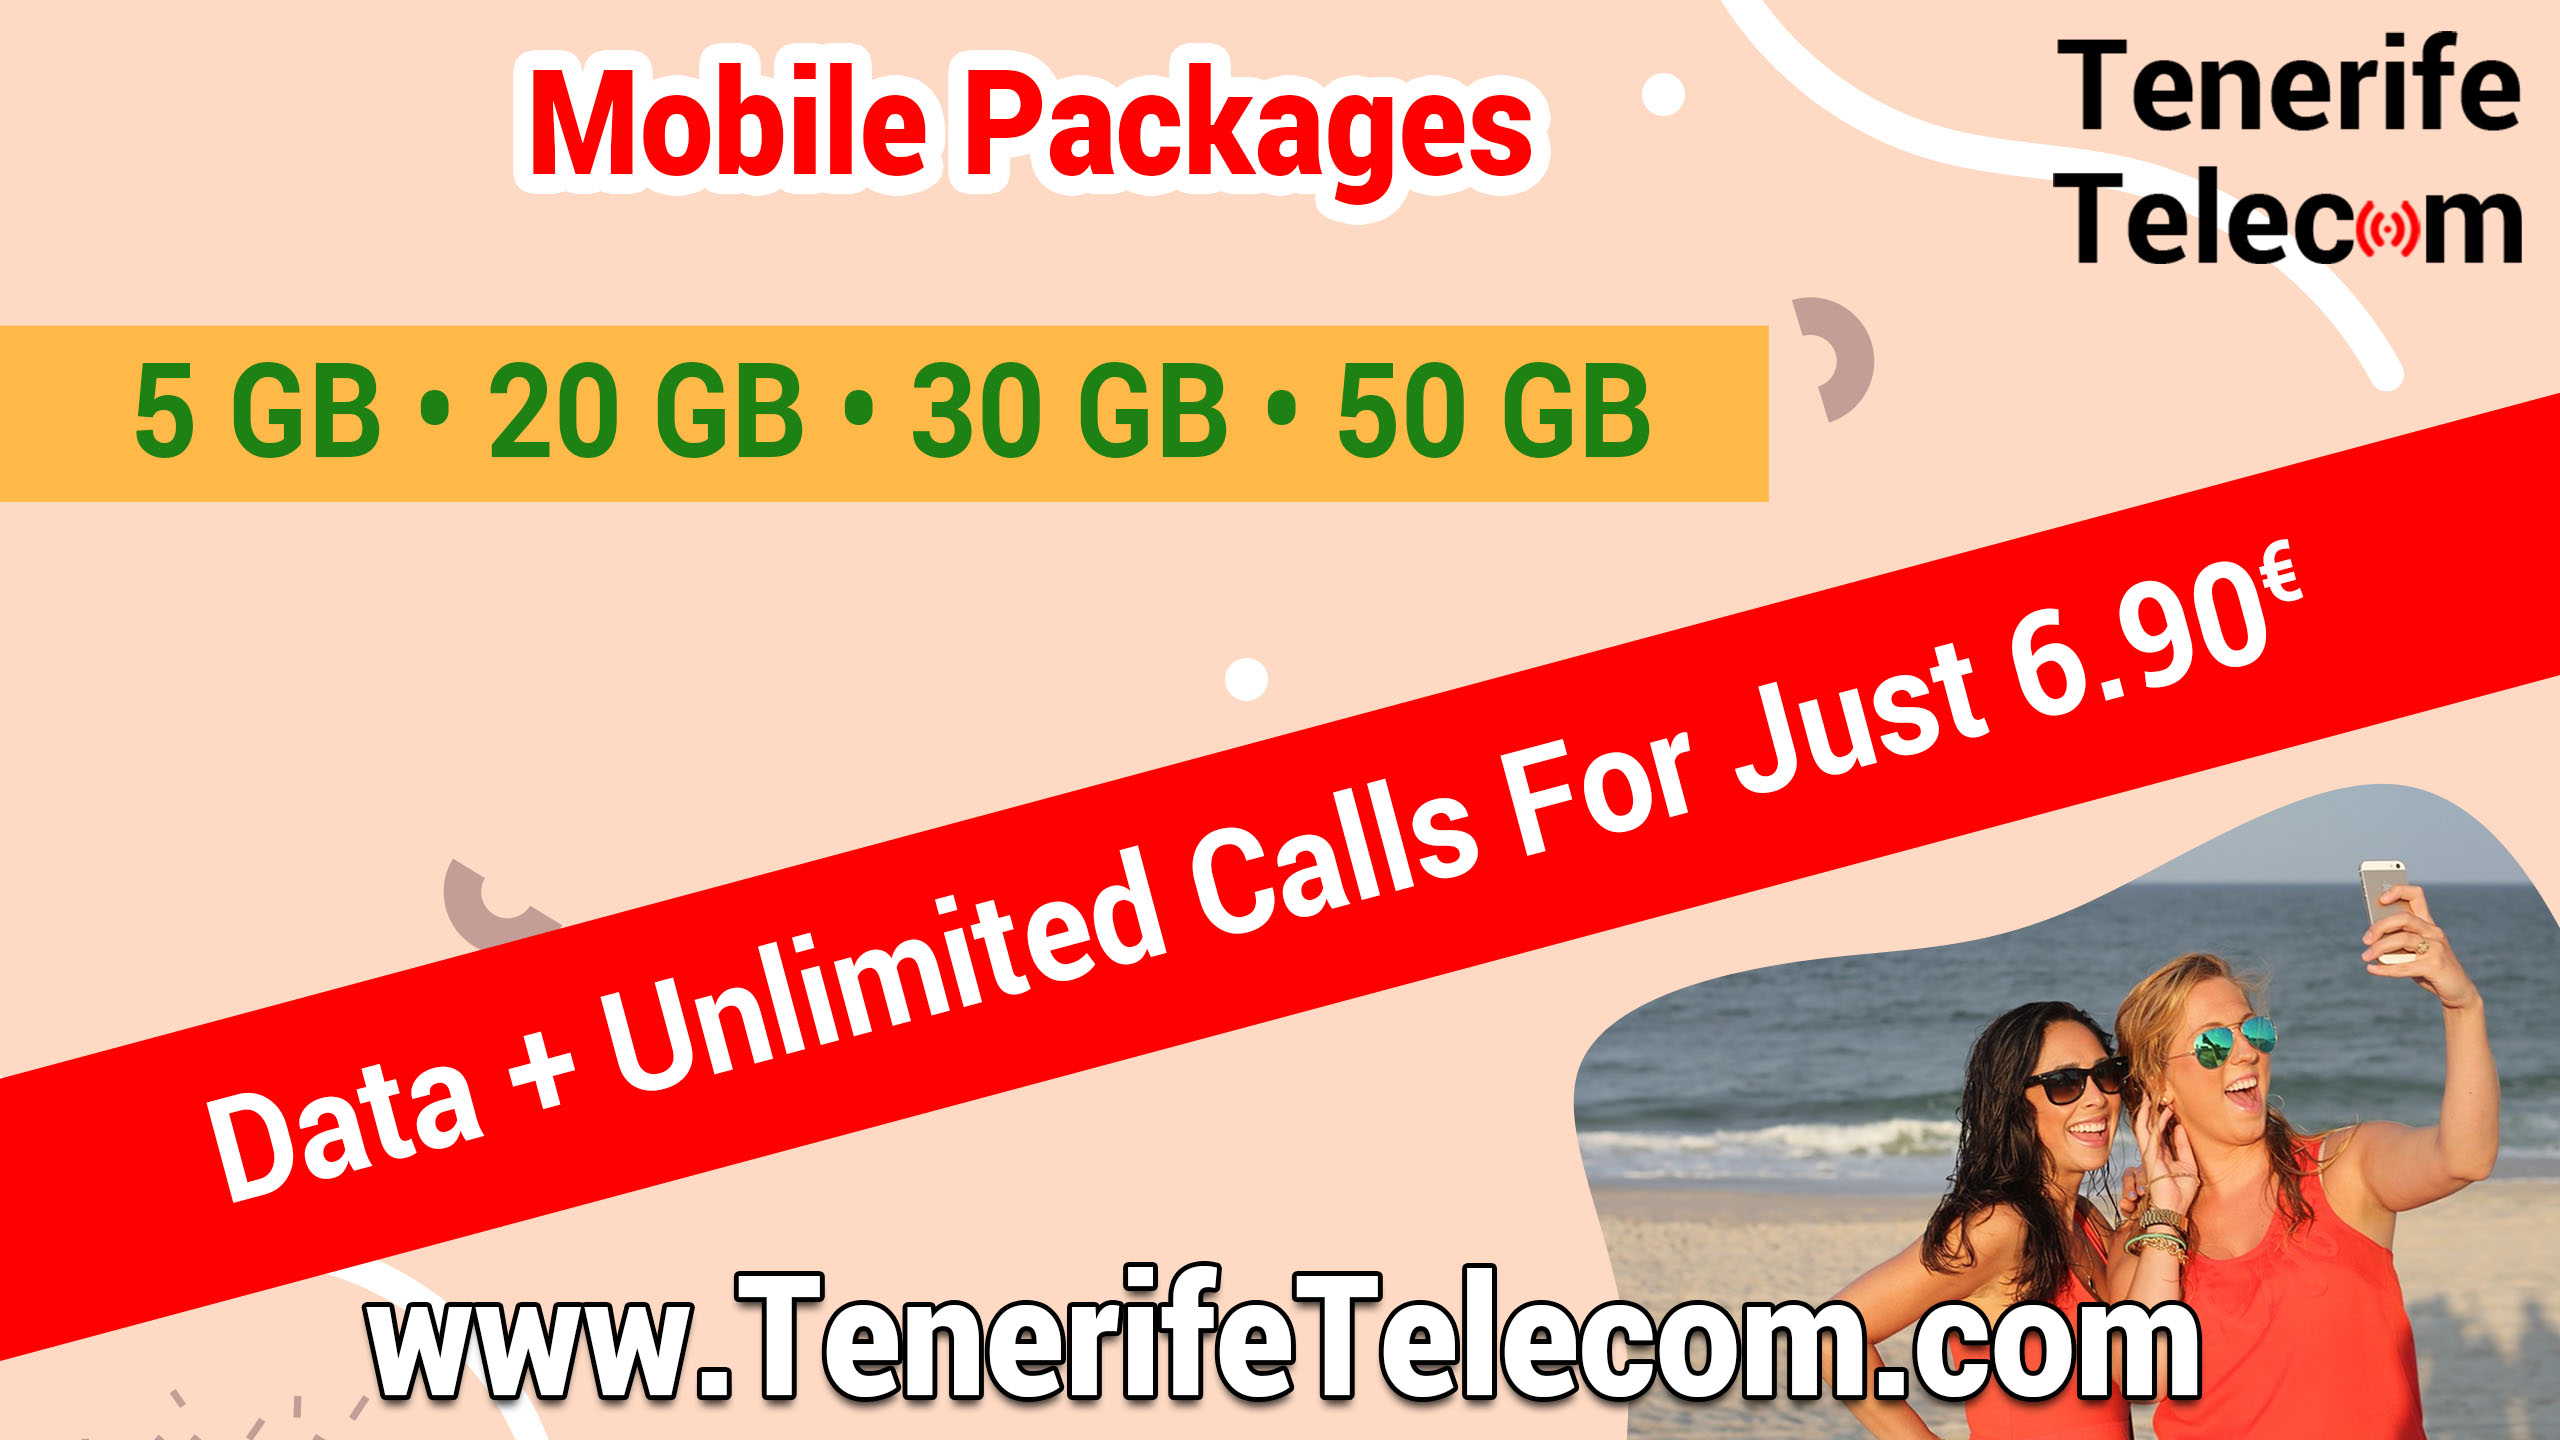 Mobile Packages from Tenerife Telecom